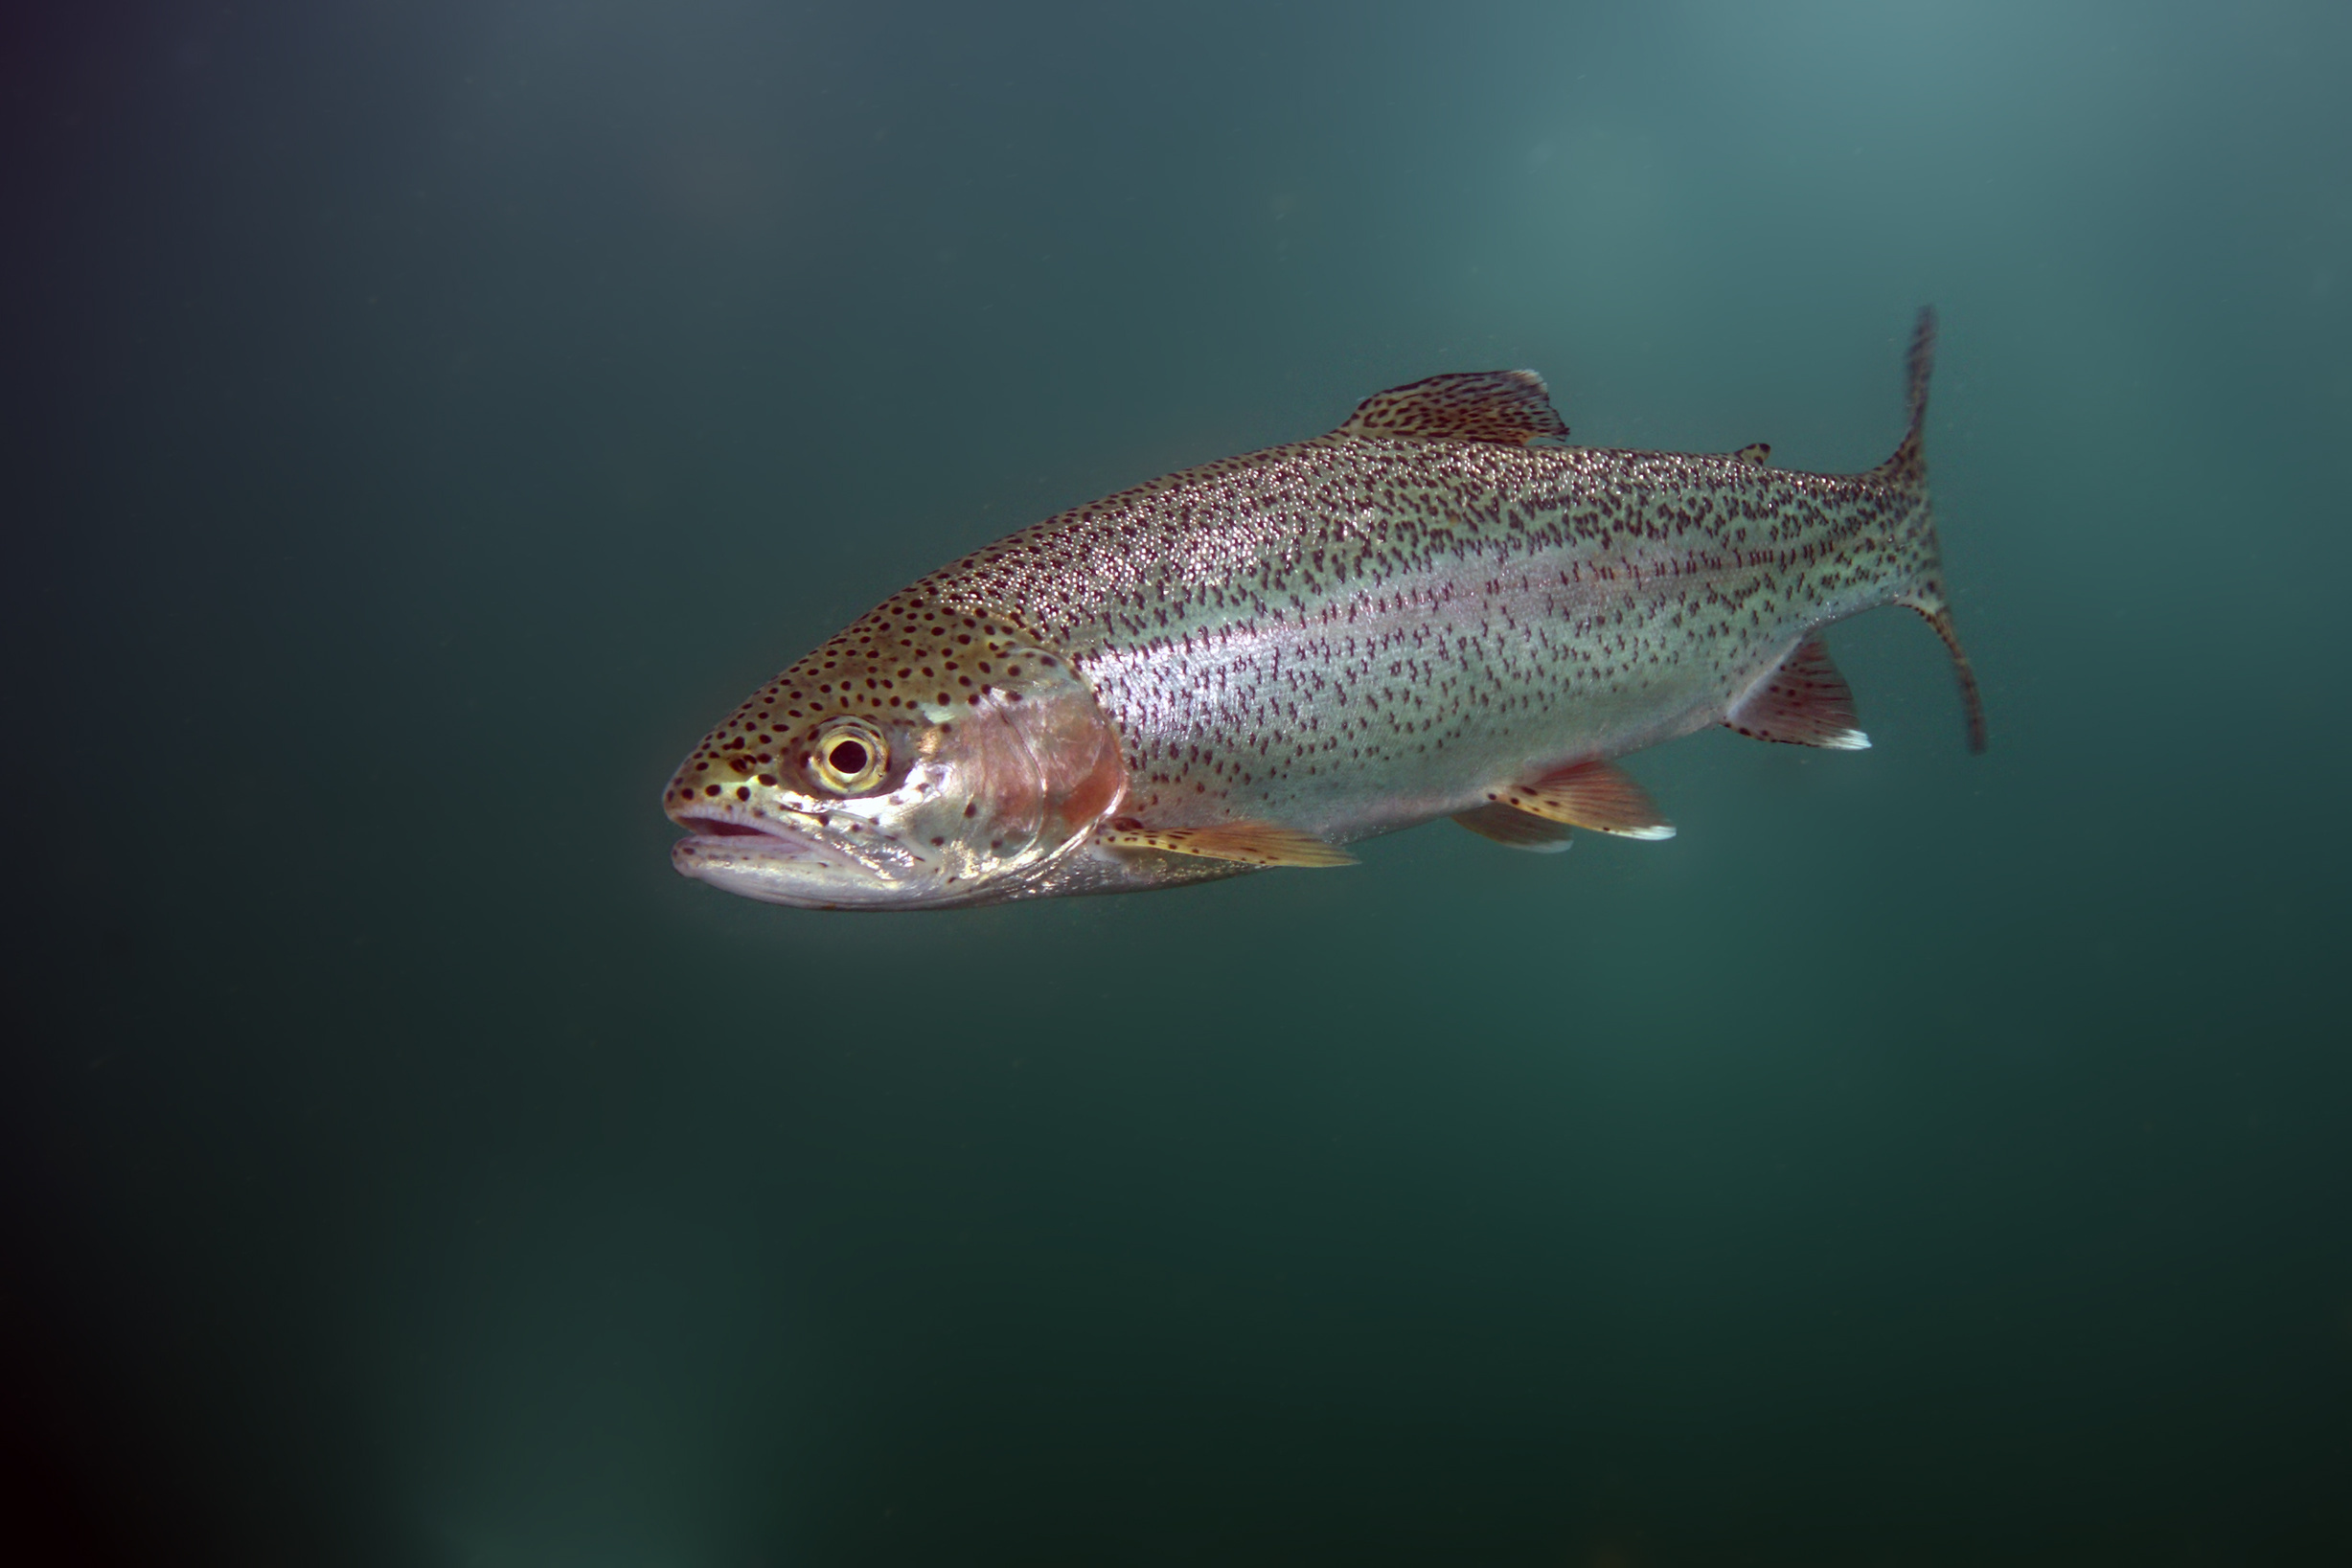 GLFT-funded researchers describe the diets of predatory fish